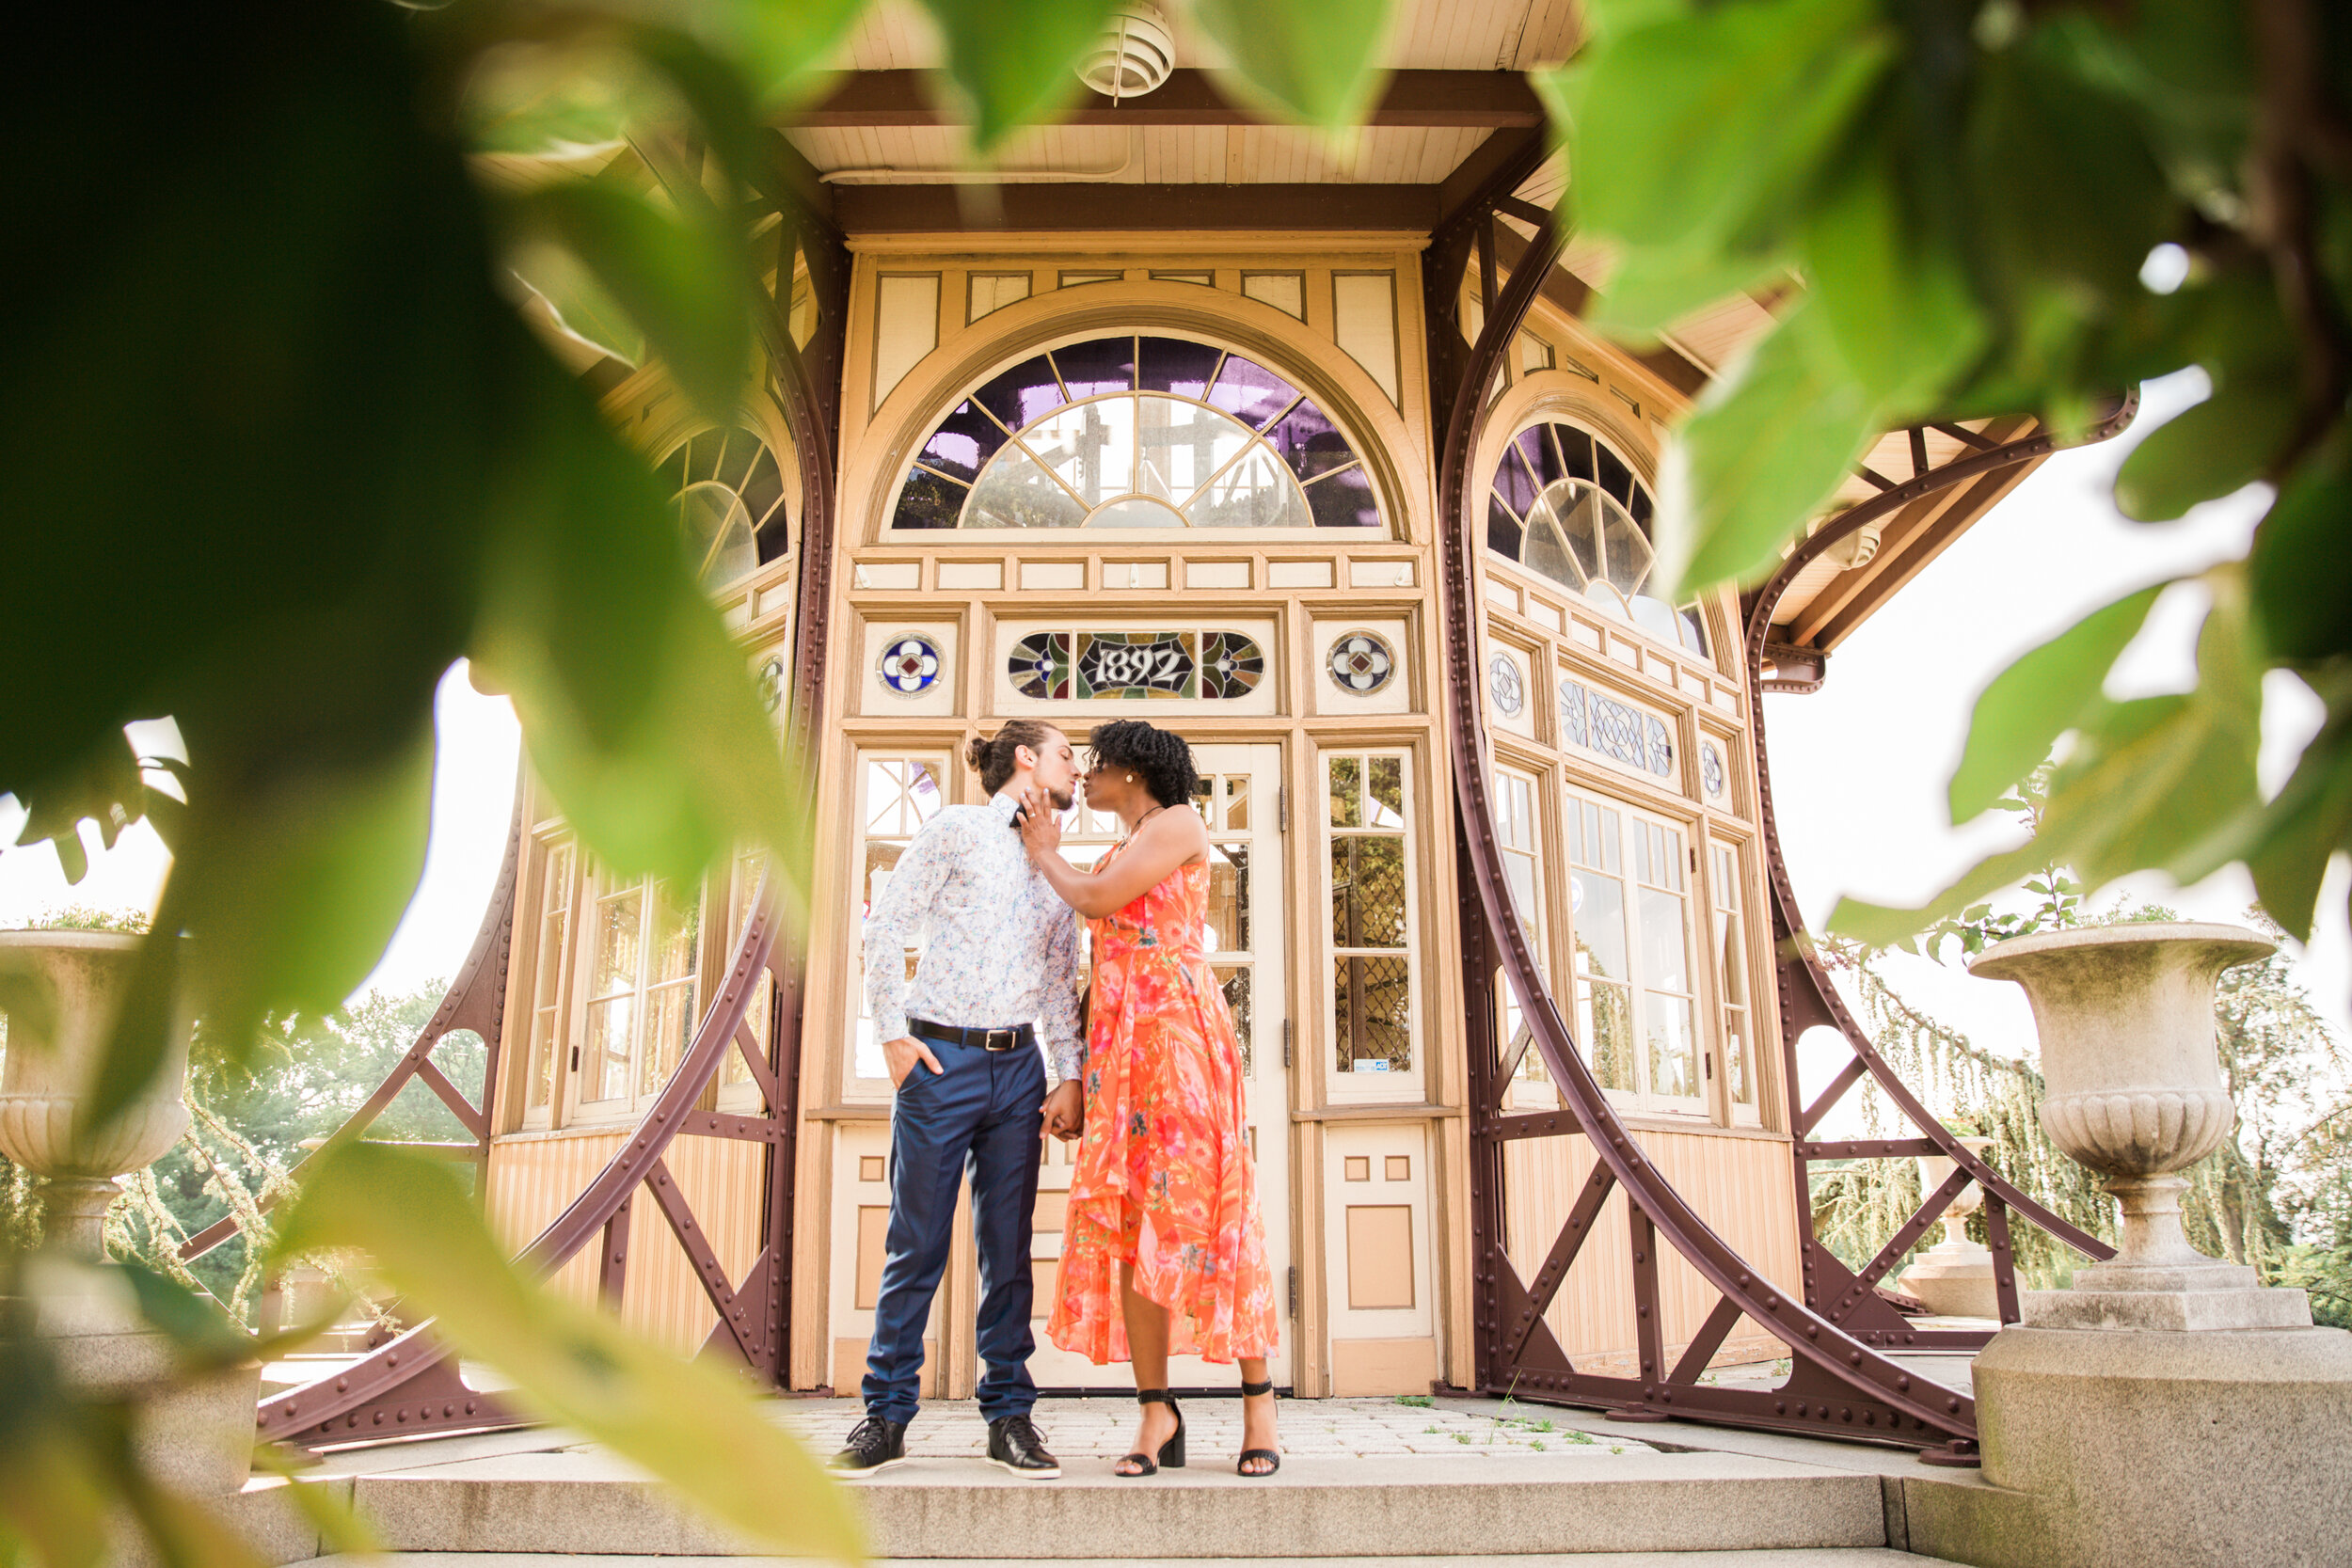 Golden Hour Engagement Session in Baltimore Maryland Patterson Park Pagoda DC Wedding Photographers Megapixels Media Photography and Videography Mixed Couple Multiracial Bride and Groom-7.jpg